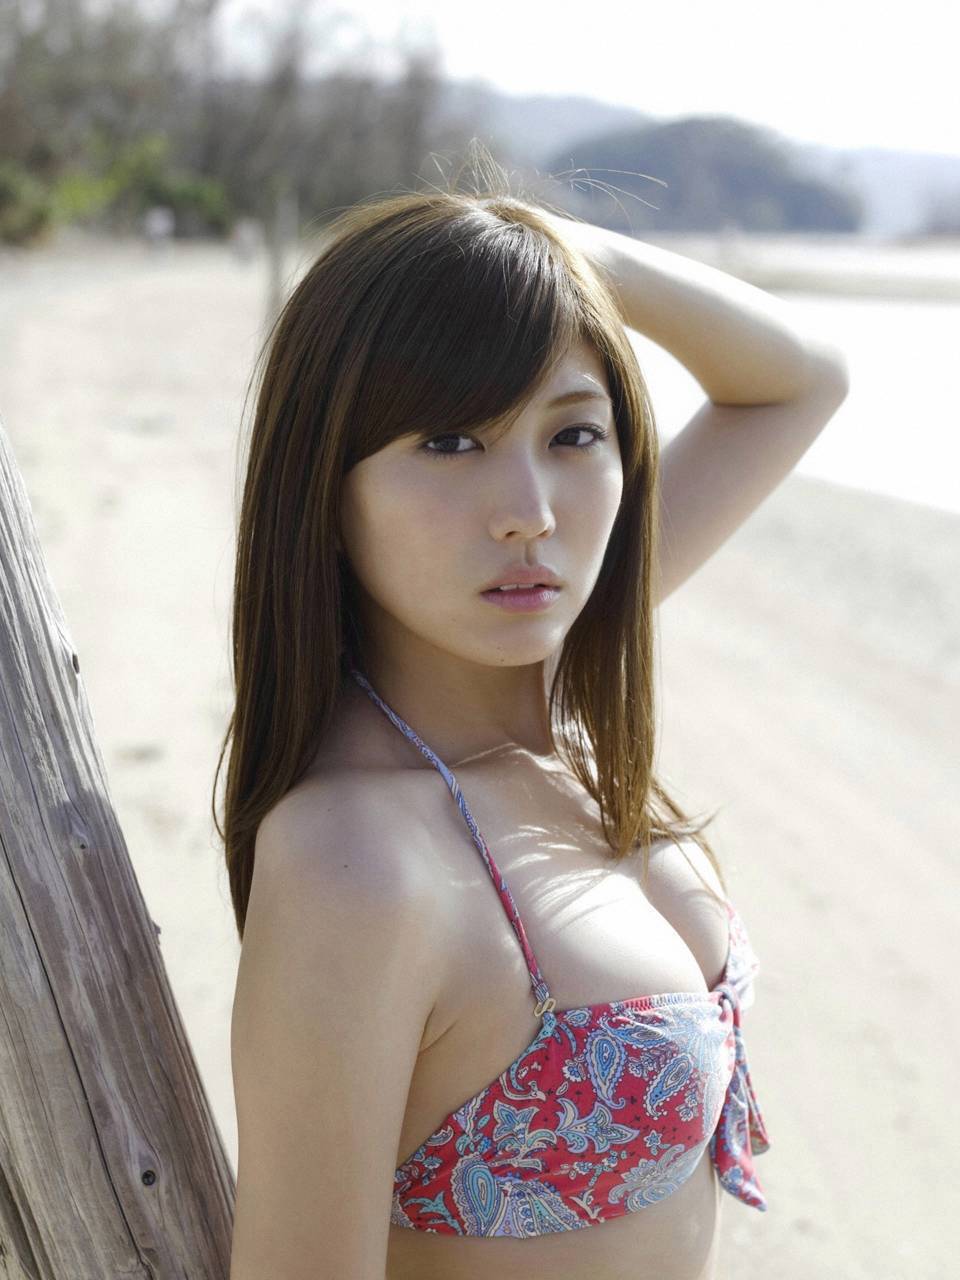 Japanese Beauty Video Site